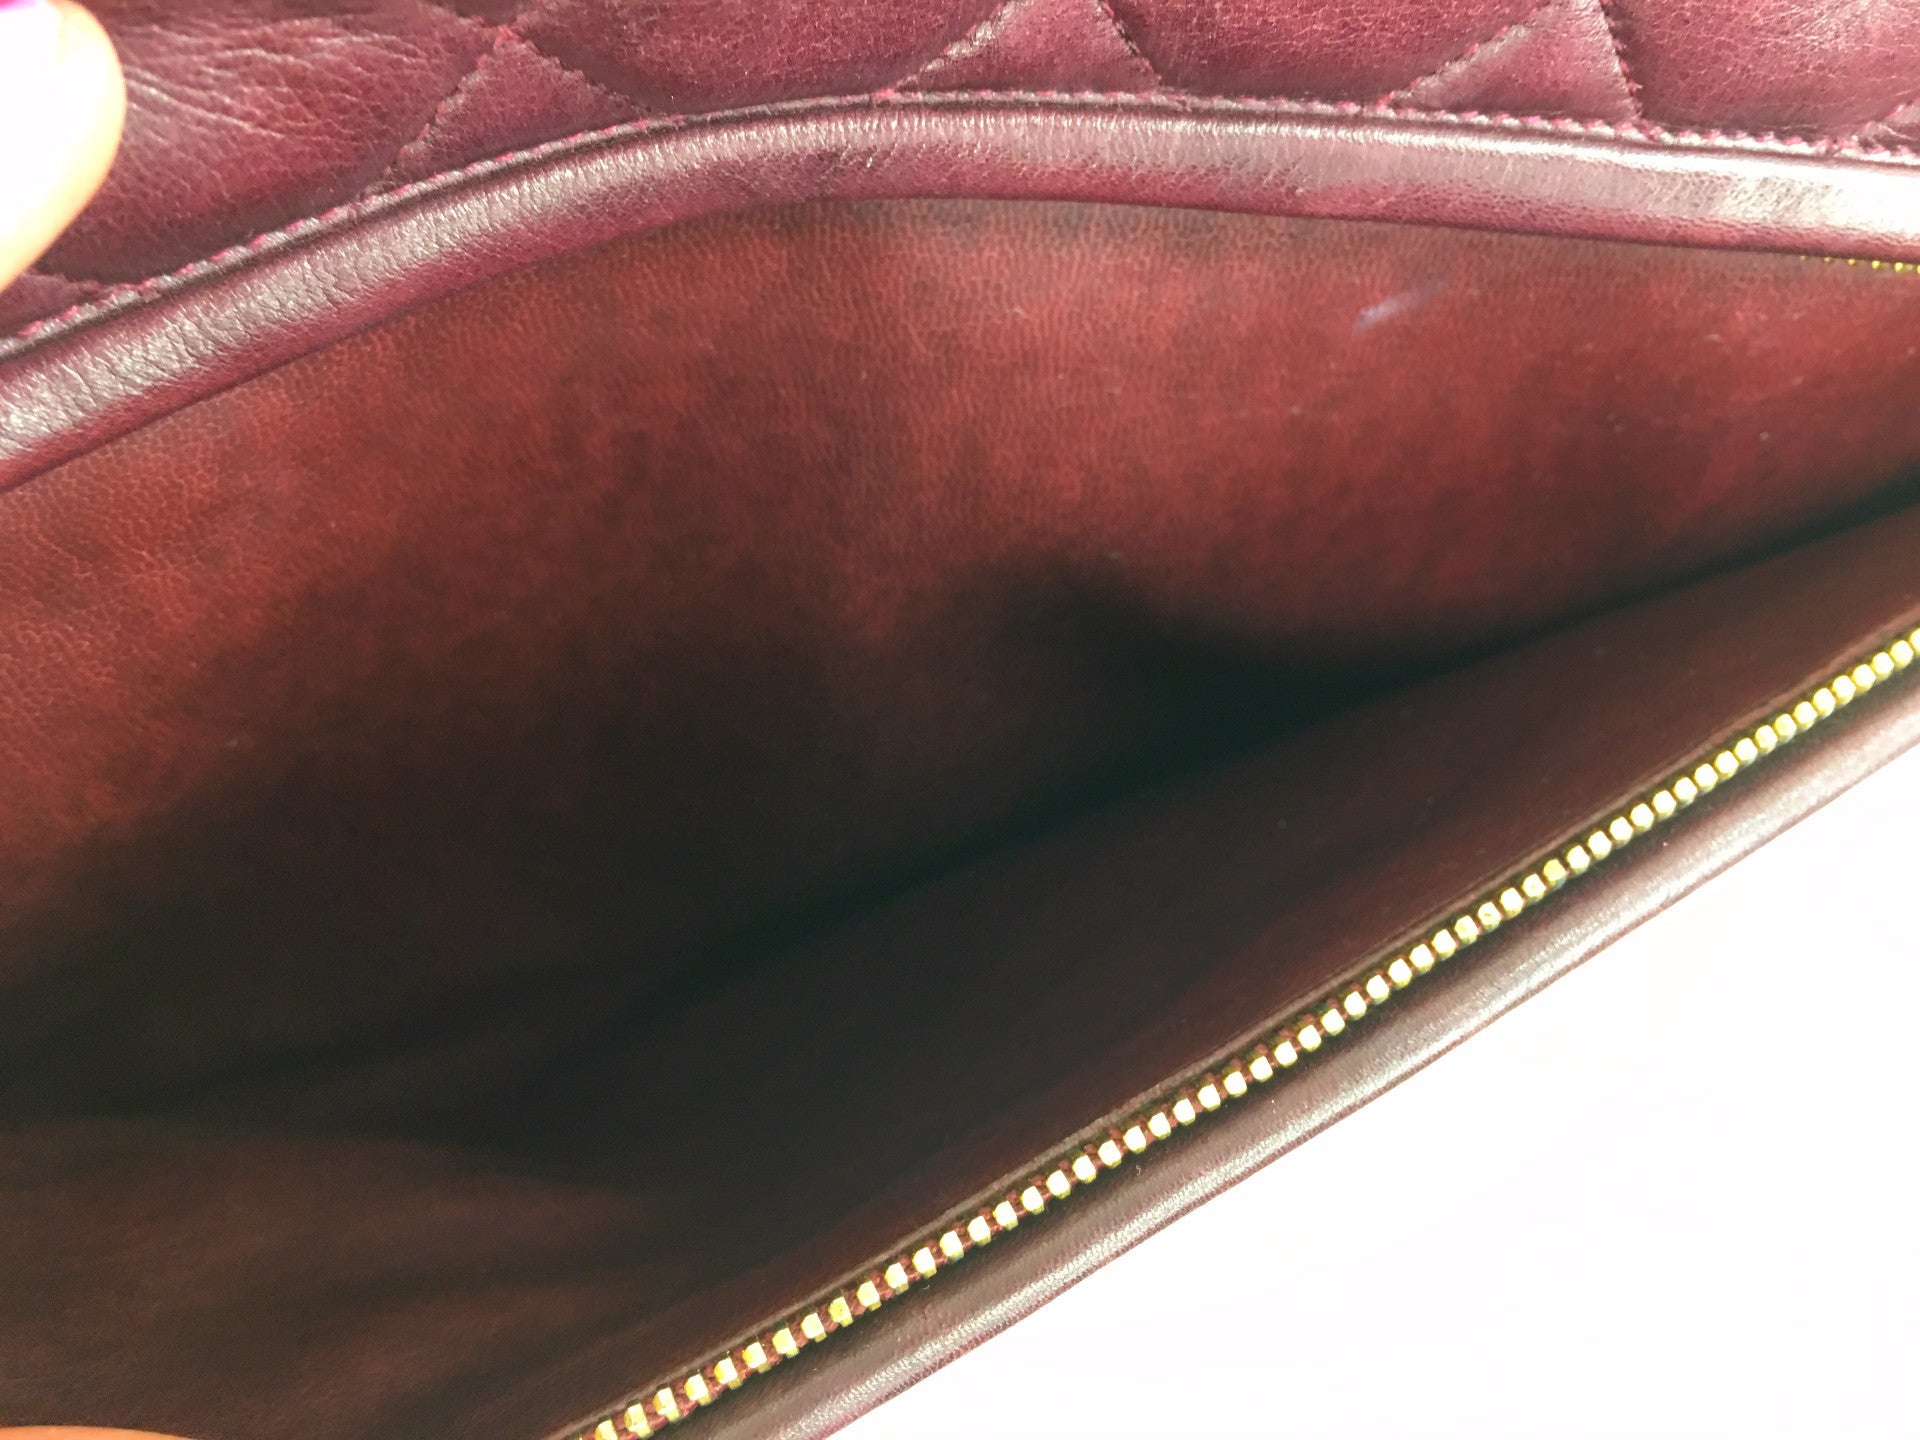 CHANEL Jumbo Quilted Burgundy Flap Bag